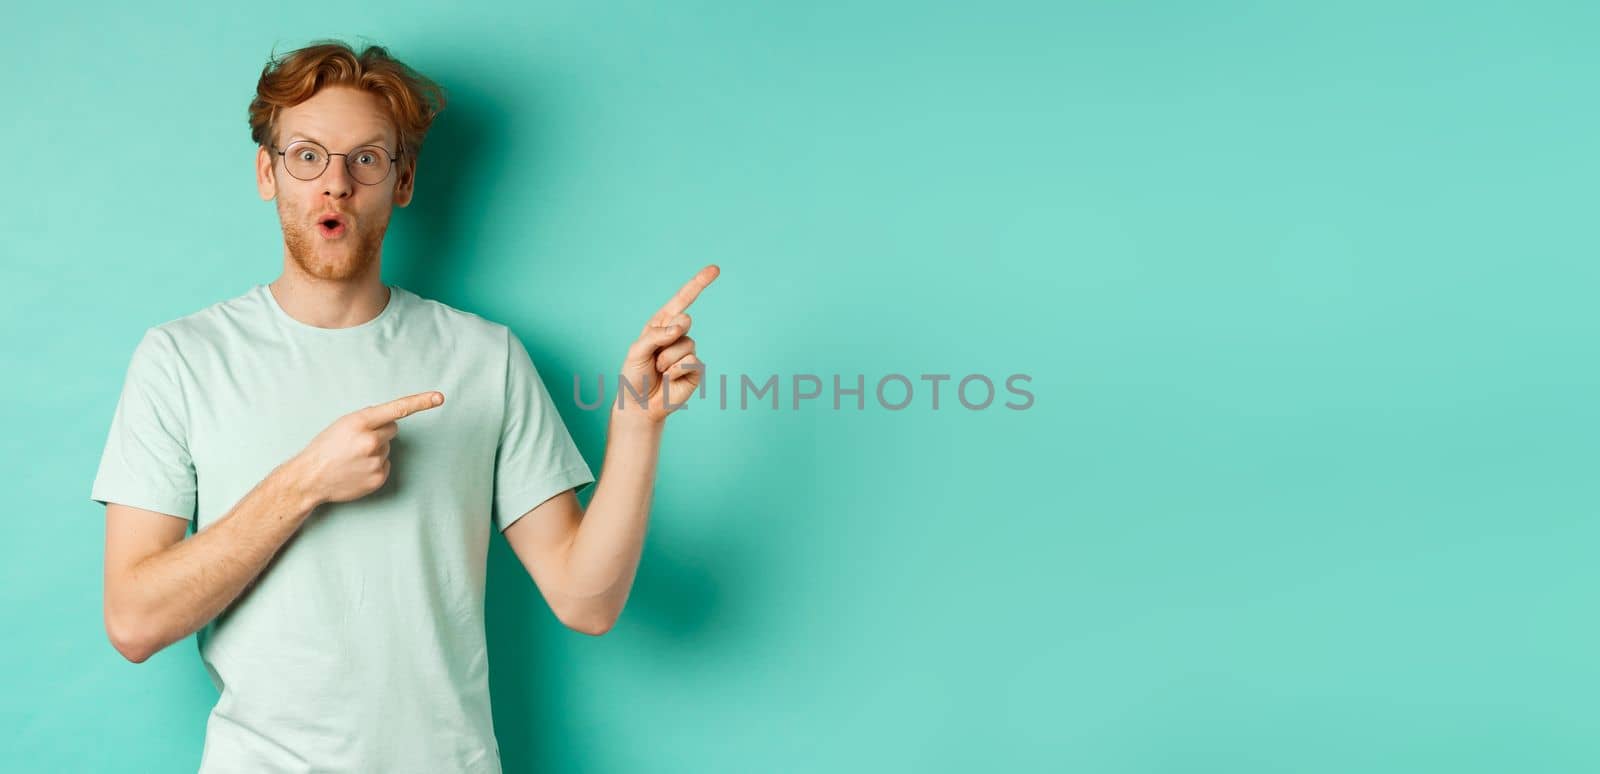 Surprised redhead guy in glasses and t-shirt checking out special deal, pointing at upper right corner promo and gasping in awe, showing banner, standing over turquoise background.